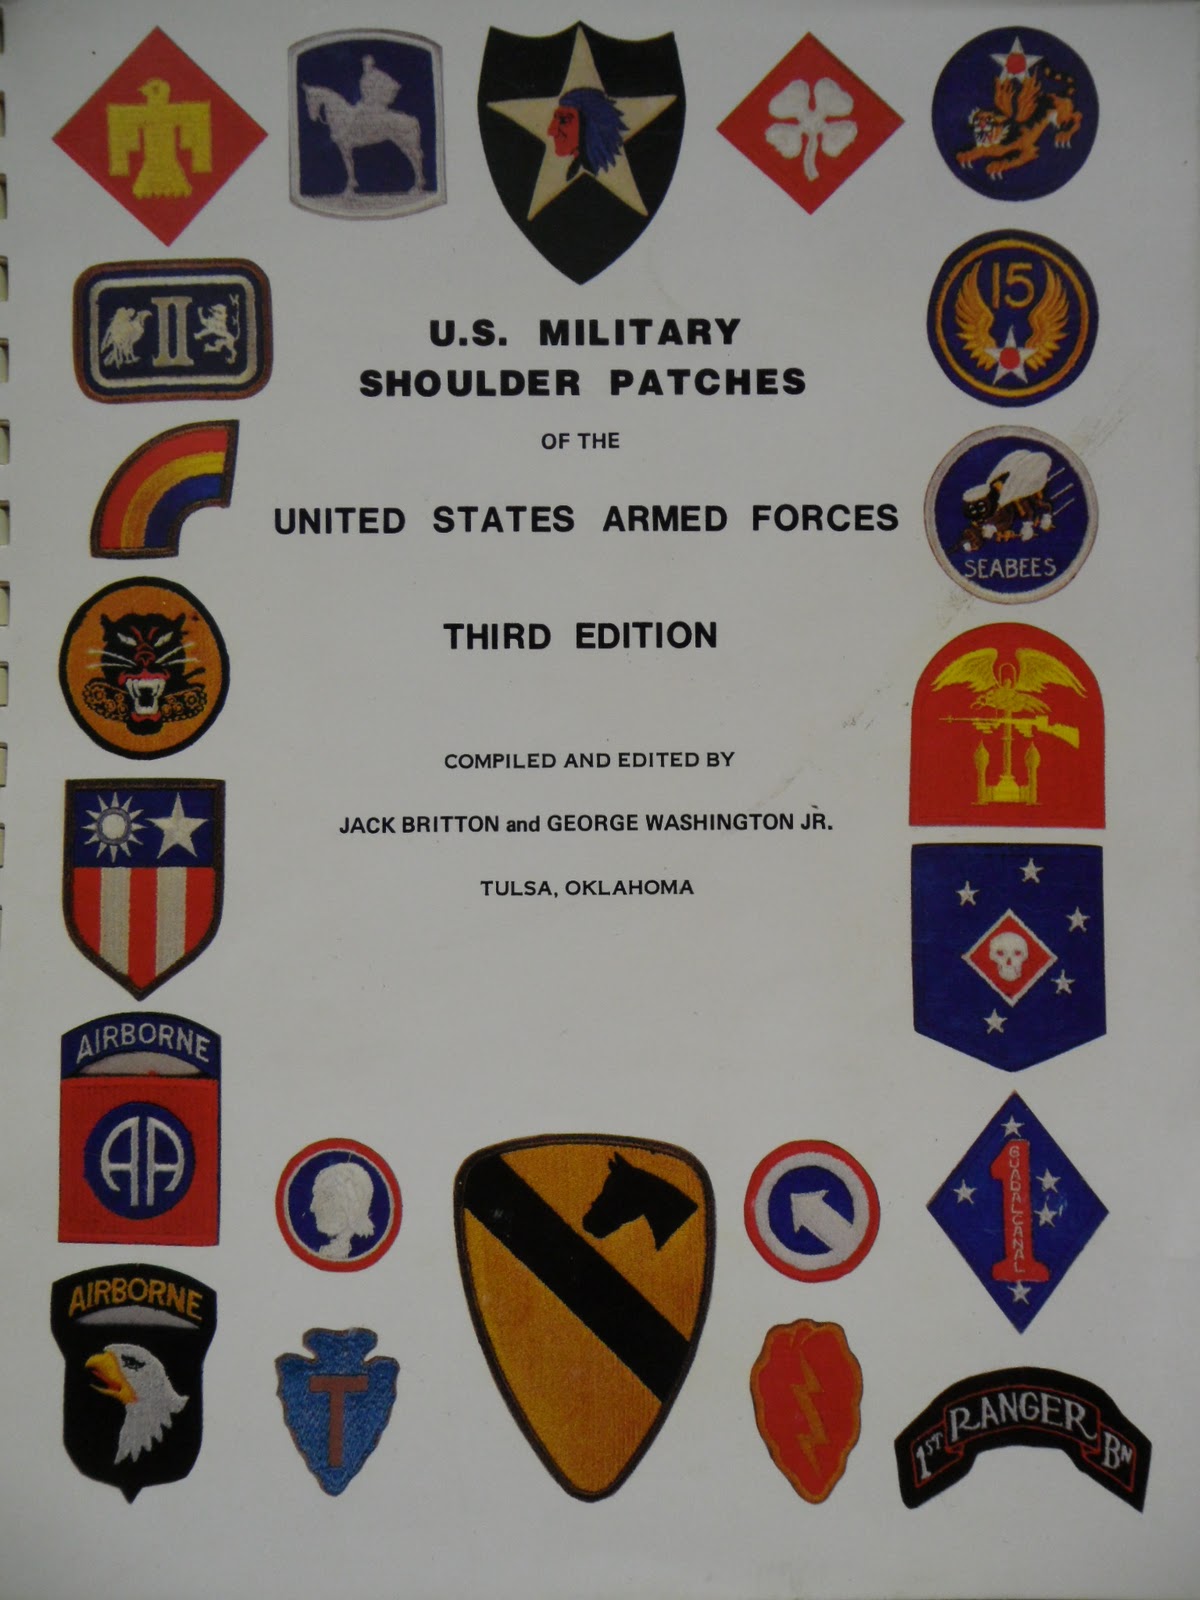 Four Bees: U.S. Military Shoulder Patches of the United ...